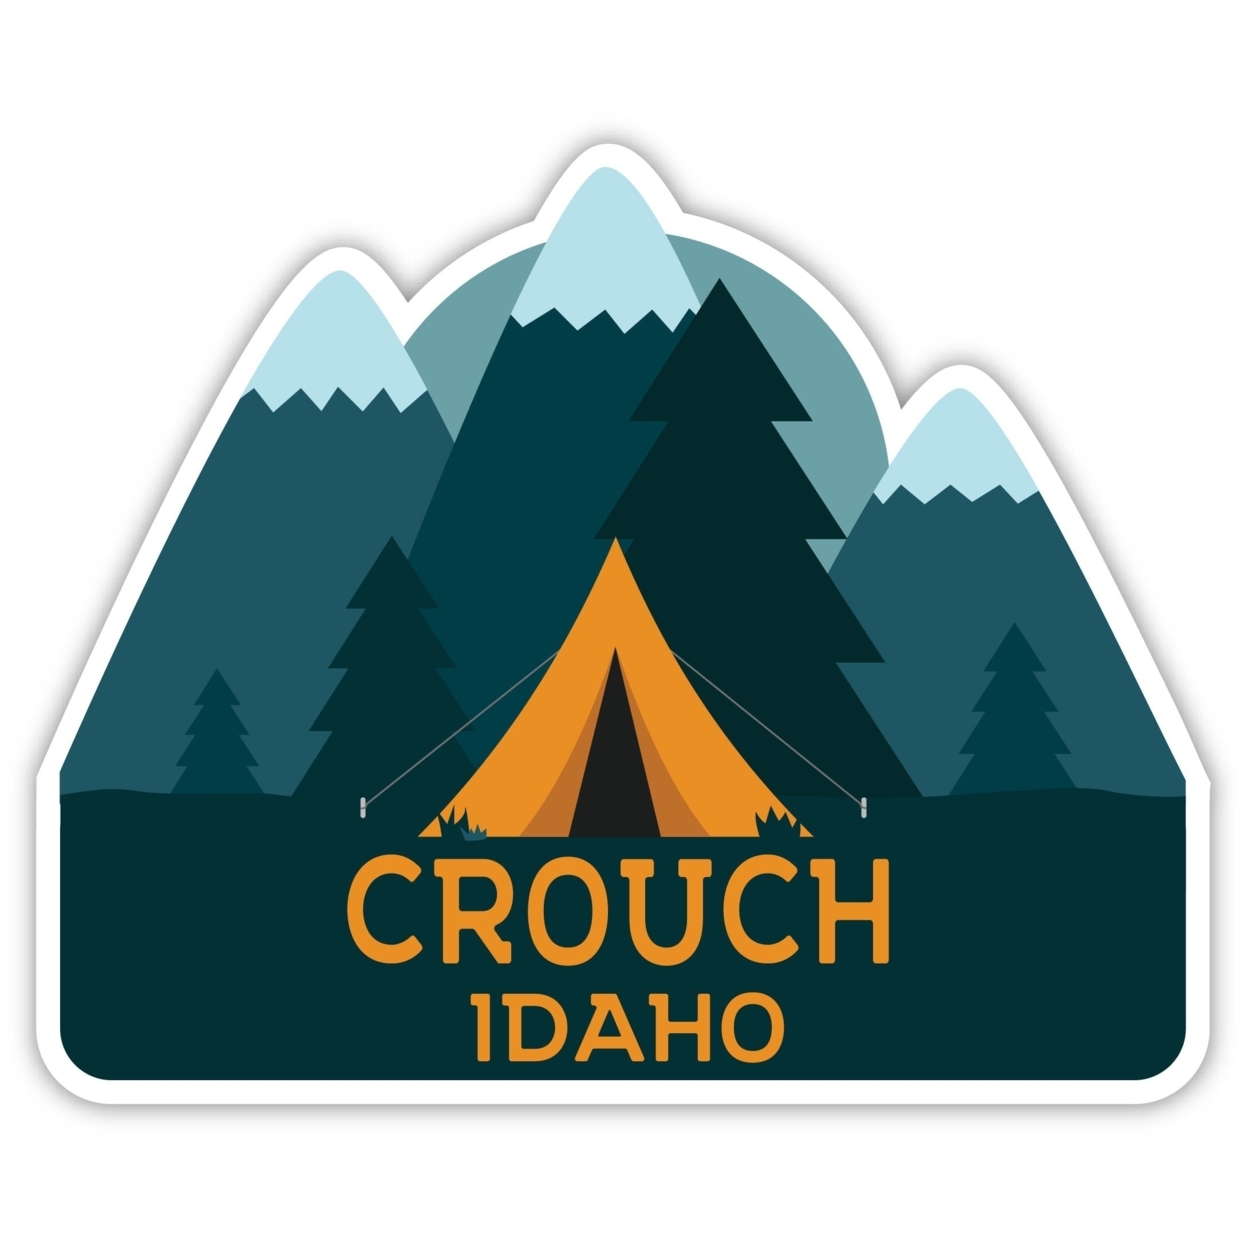 Crouch Idaho Souvenir Decorative Stickers (Choose Theme And Size) - 4-Pack, 10-Inch, Tent